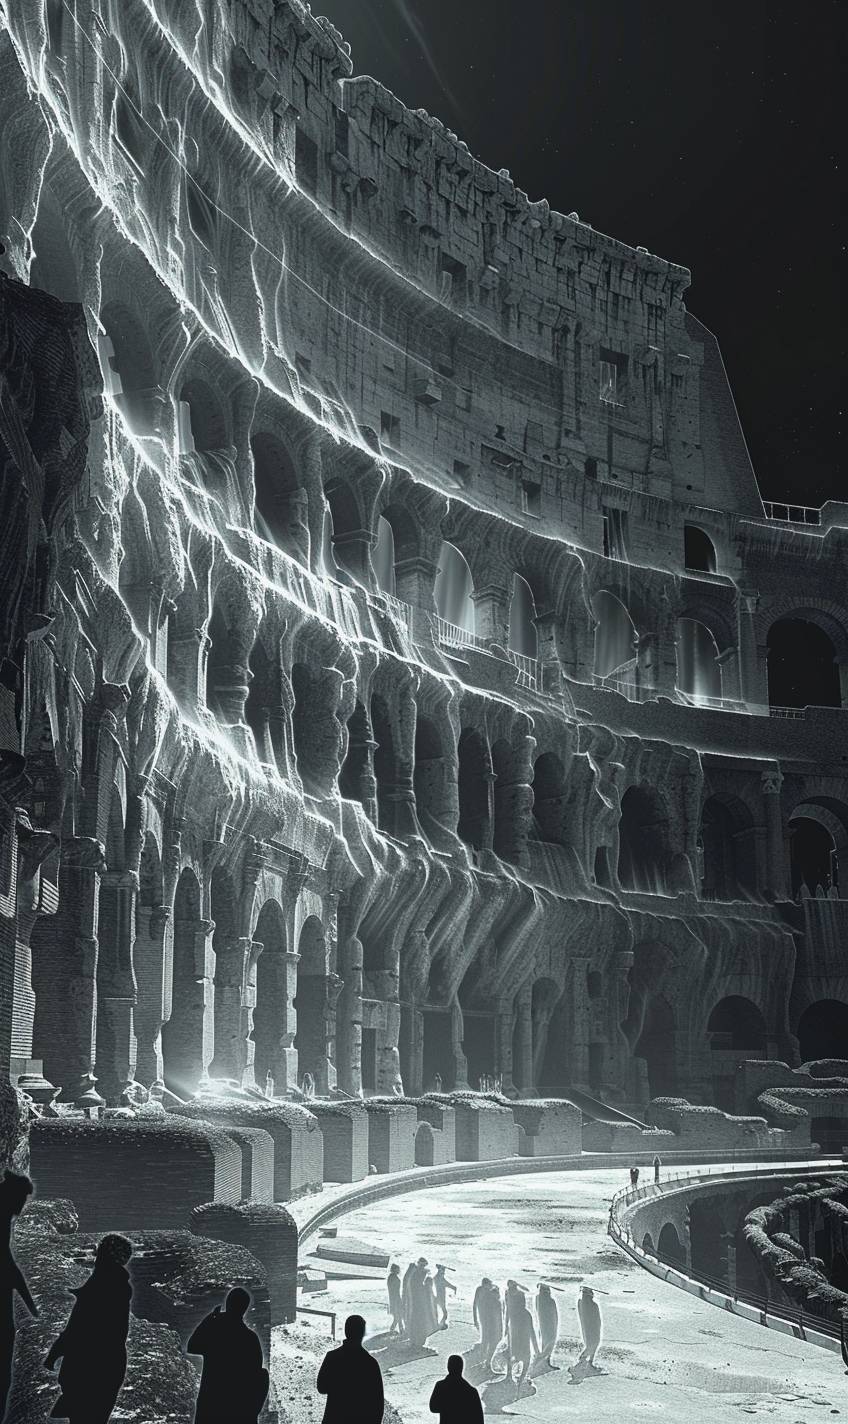 In the style of Nick Veasey, ancient coliseum hosting spectral gladiators